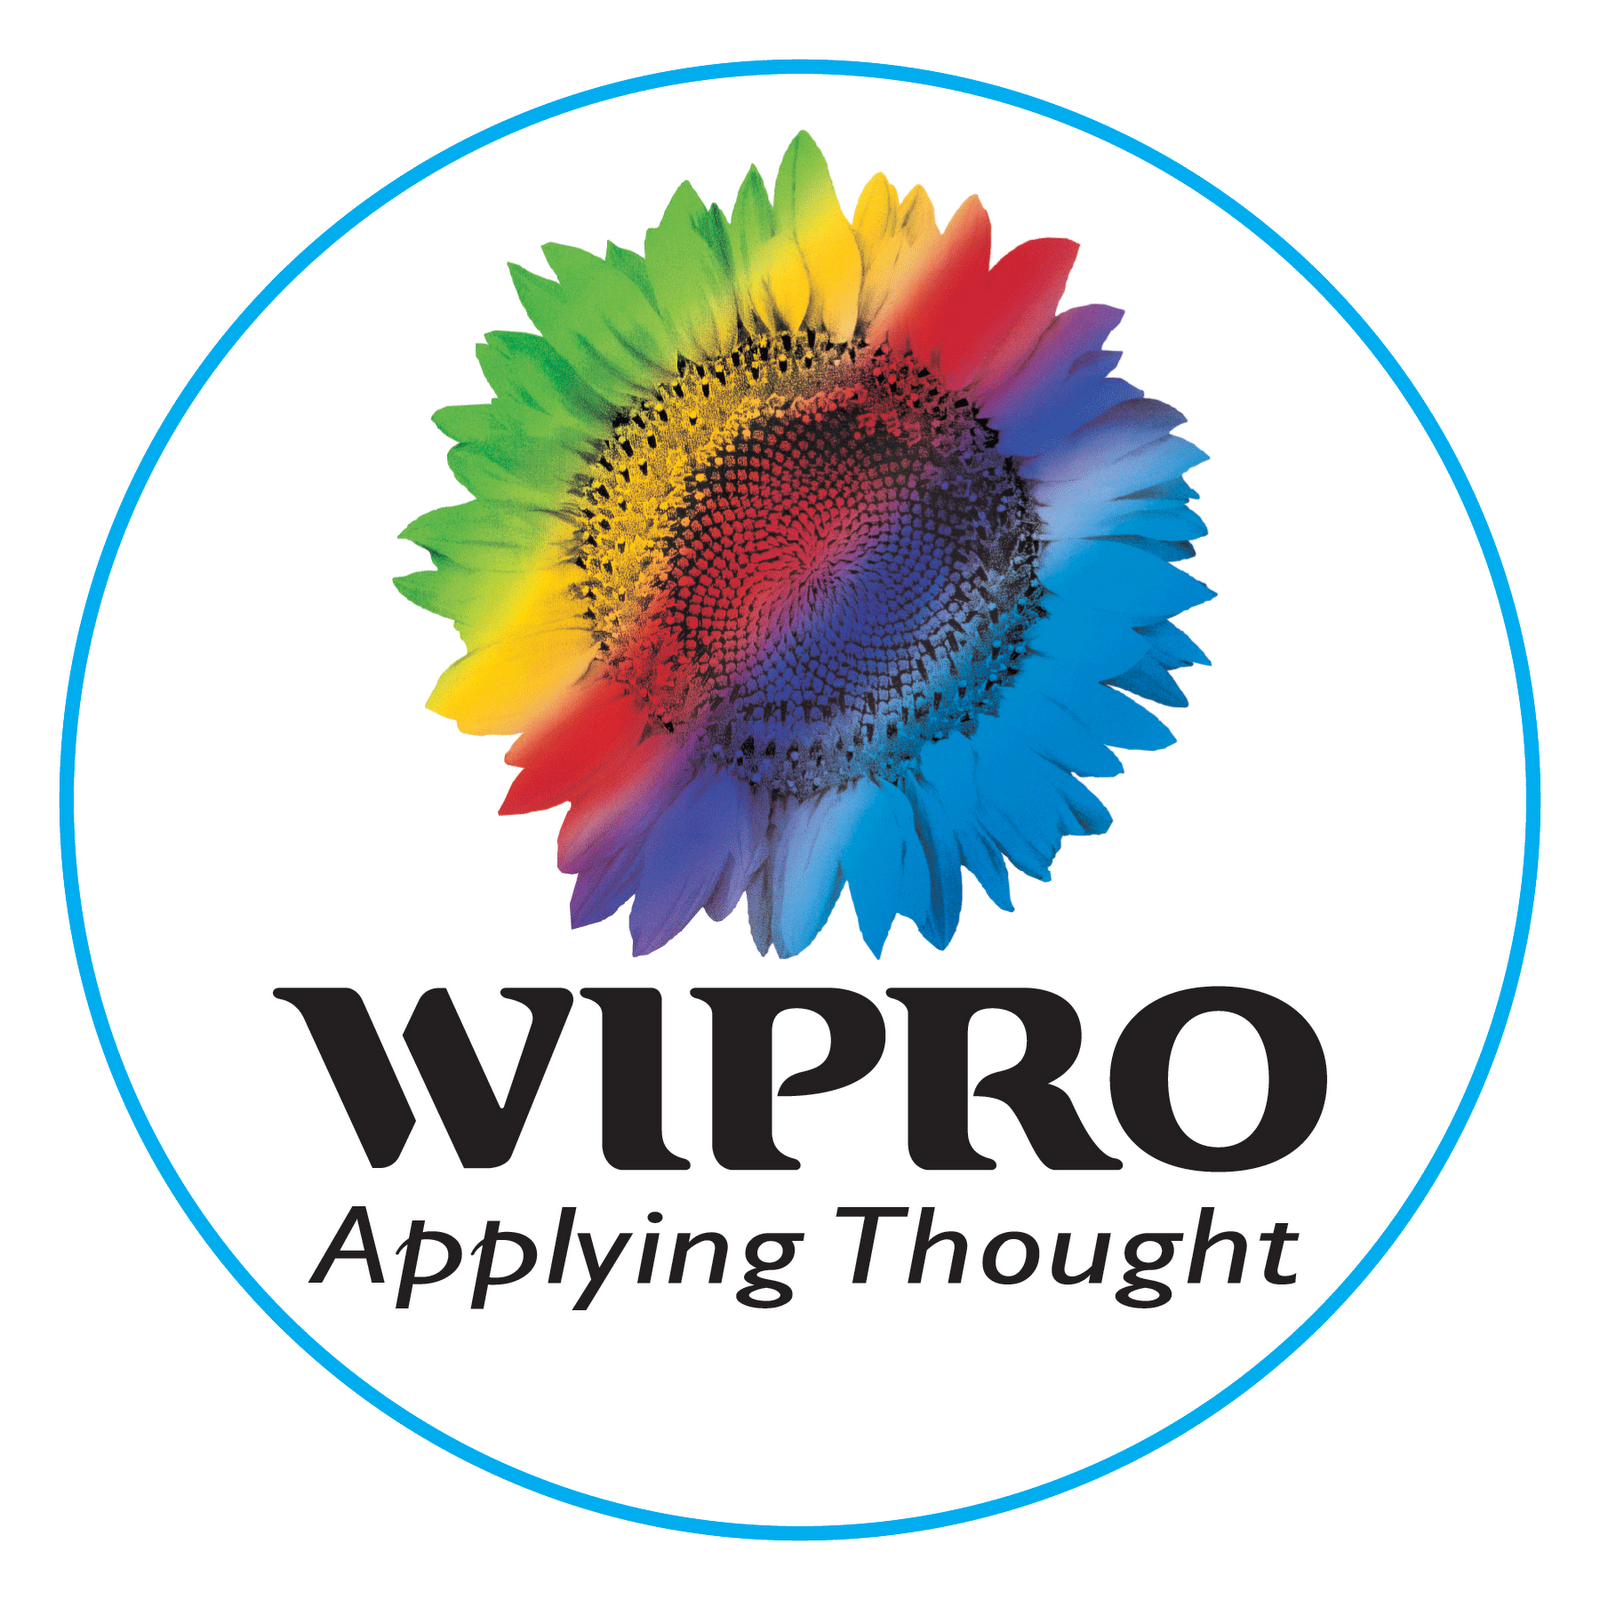 India's-third-largest-software-company-Wipro-is-all-set-to-become-US-$15-Billion-Company-By-2020